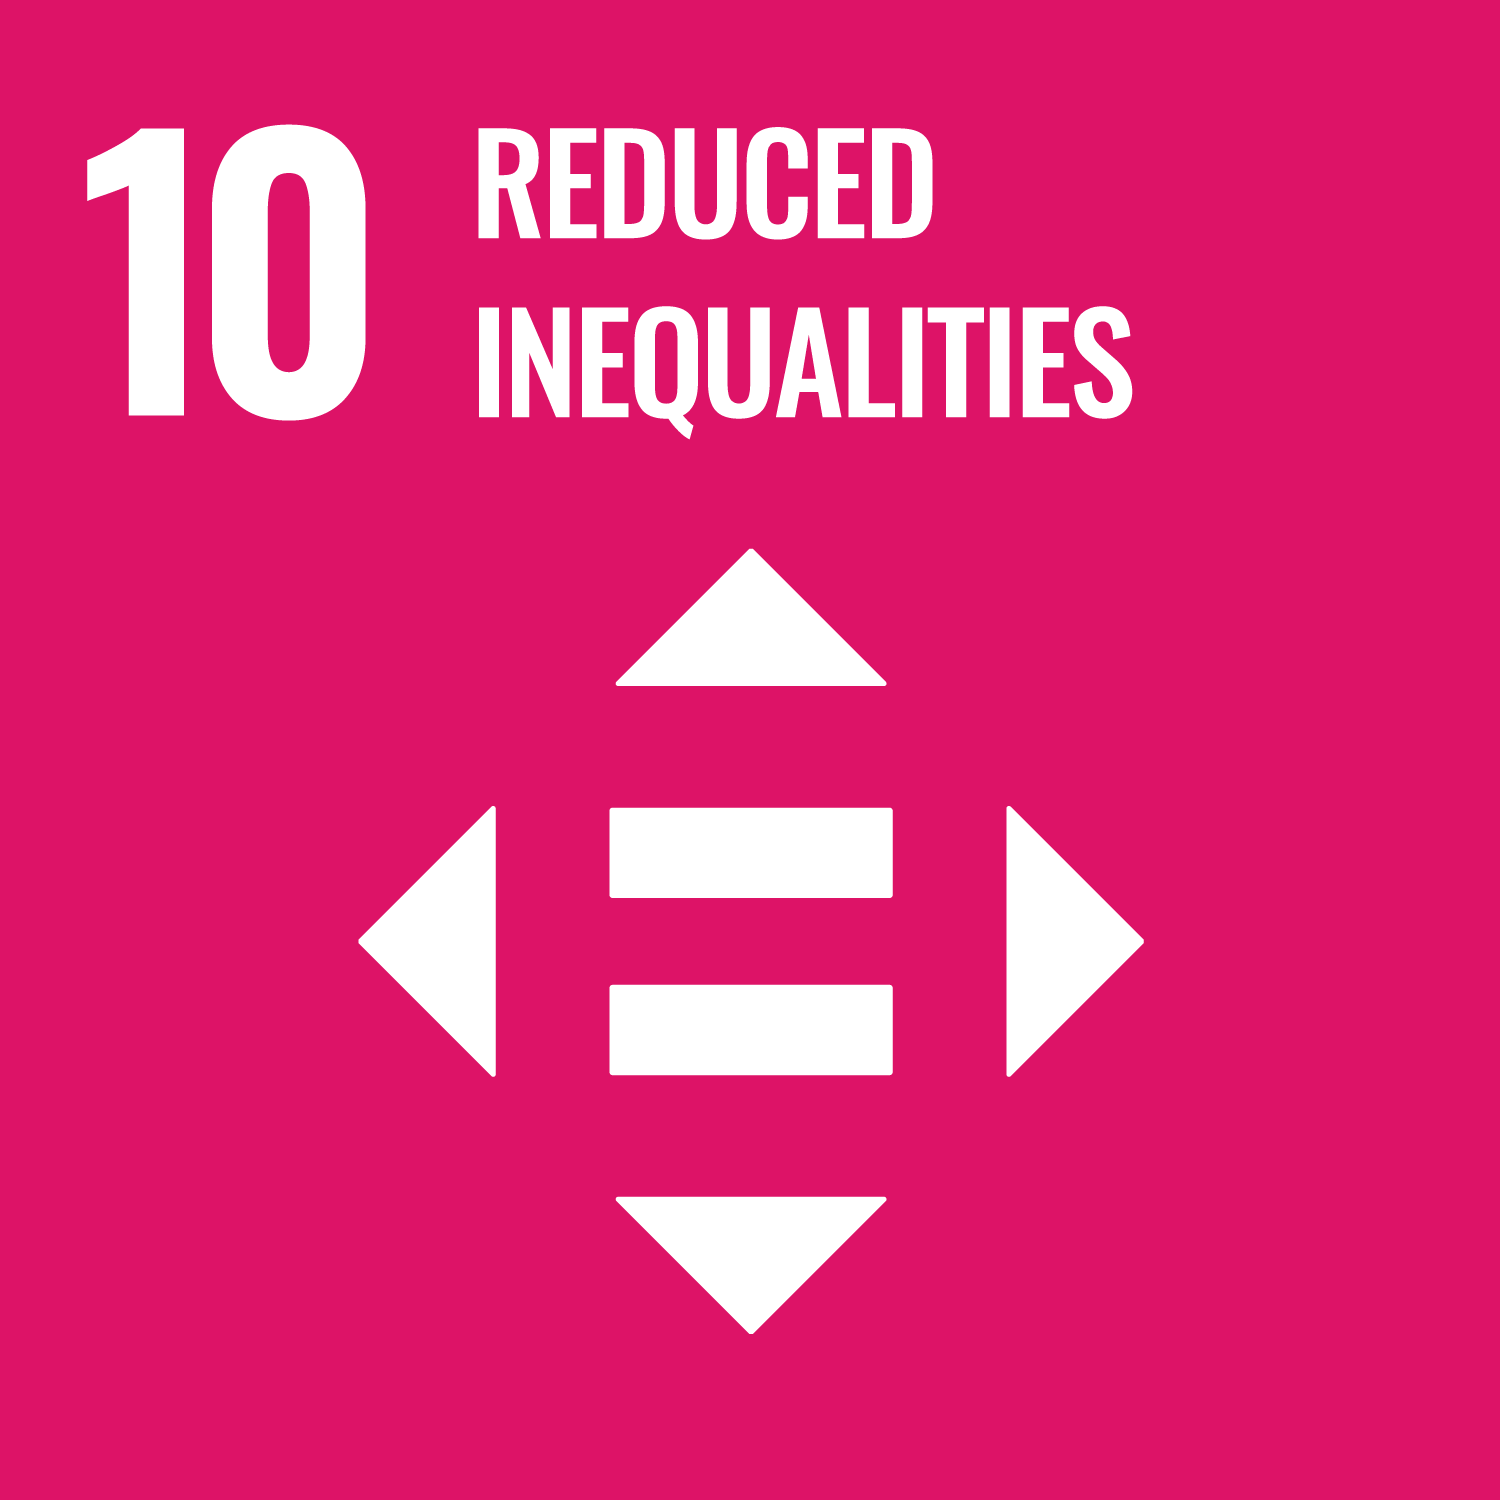 On a pink background, white text reads "10. Reduced equalities". Beneath this is an illustration of four arrows pointing in all directions with an equal sign in the centre.